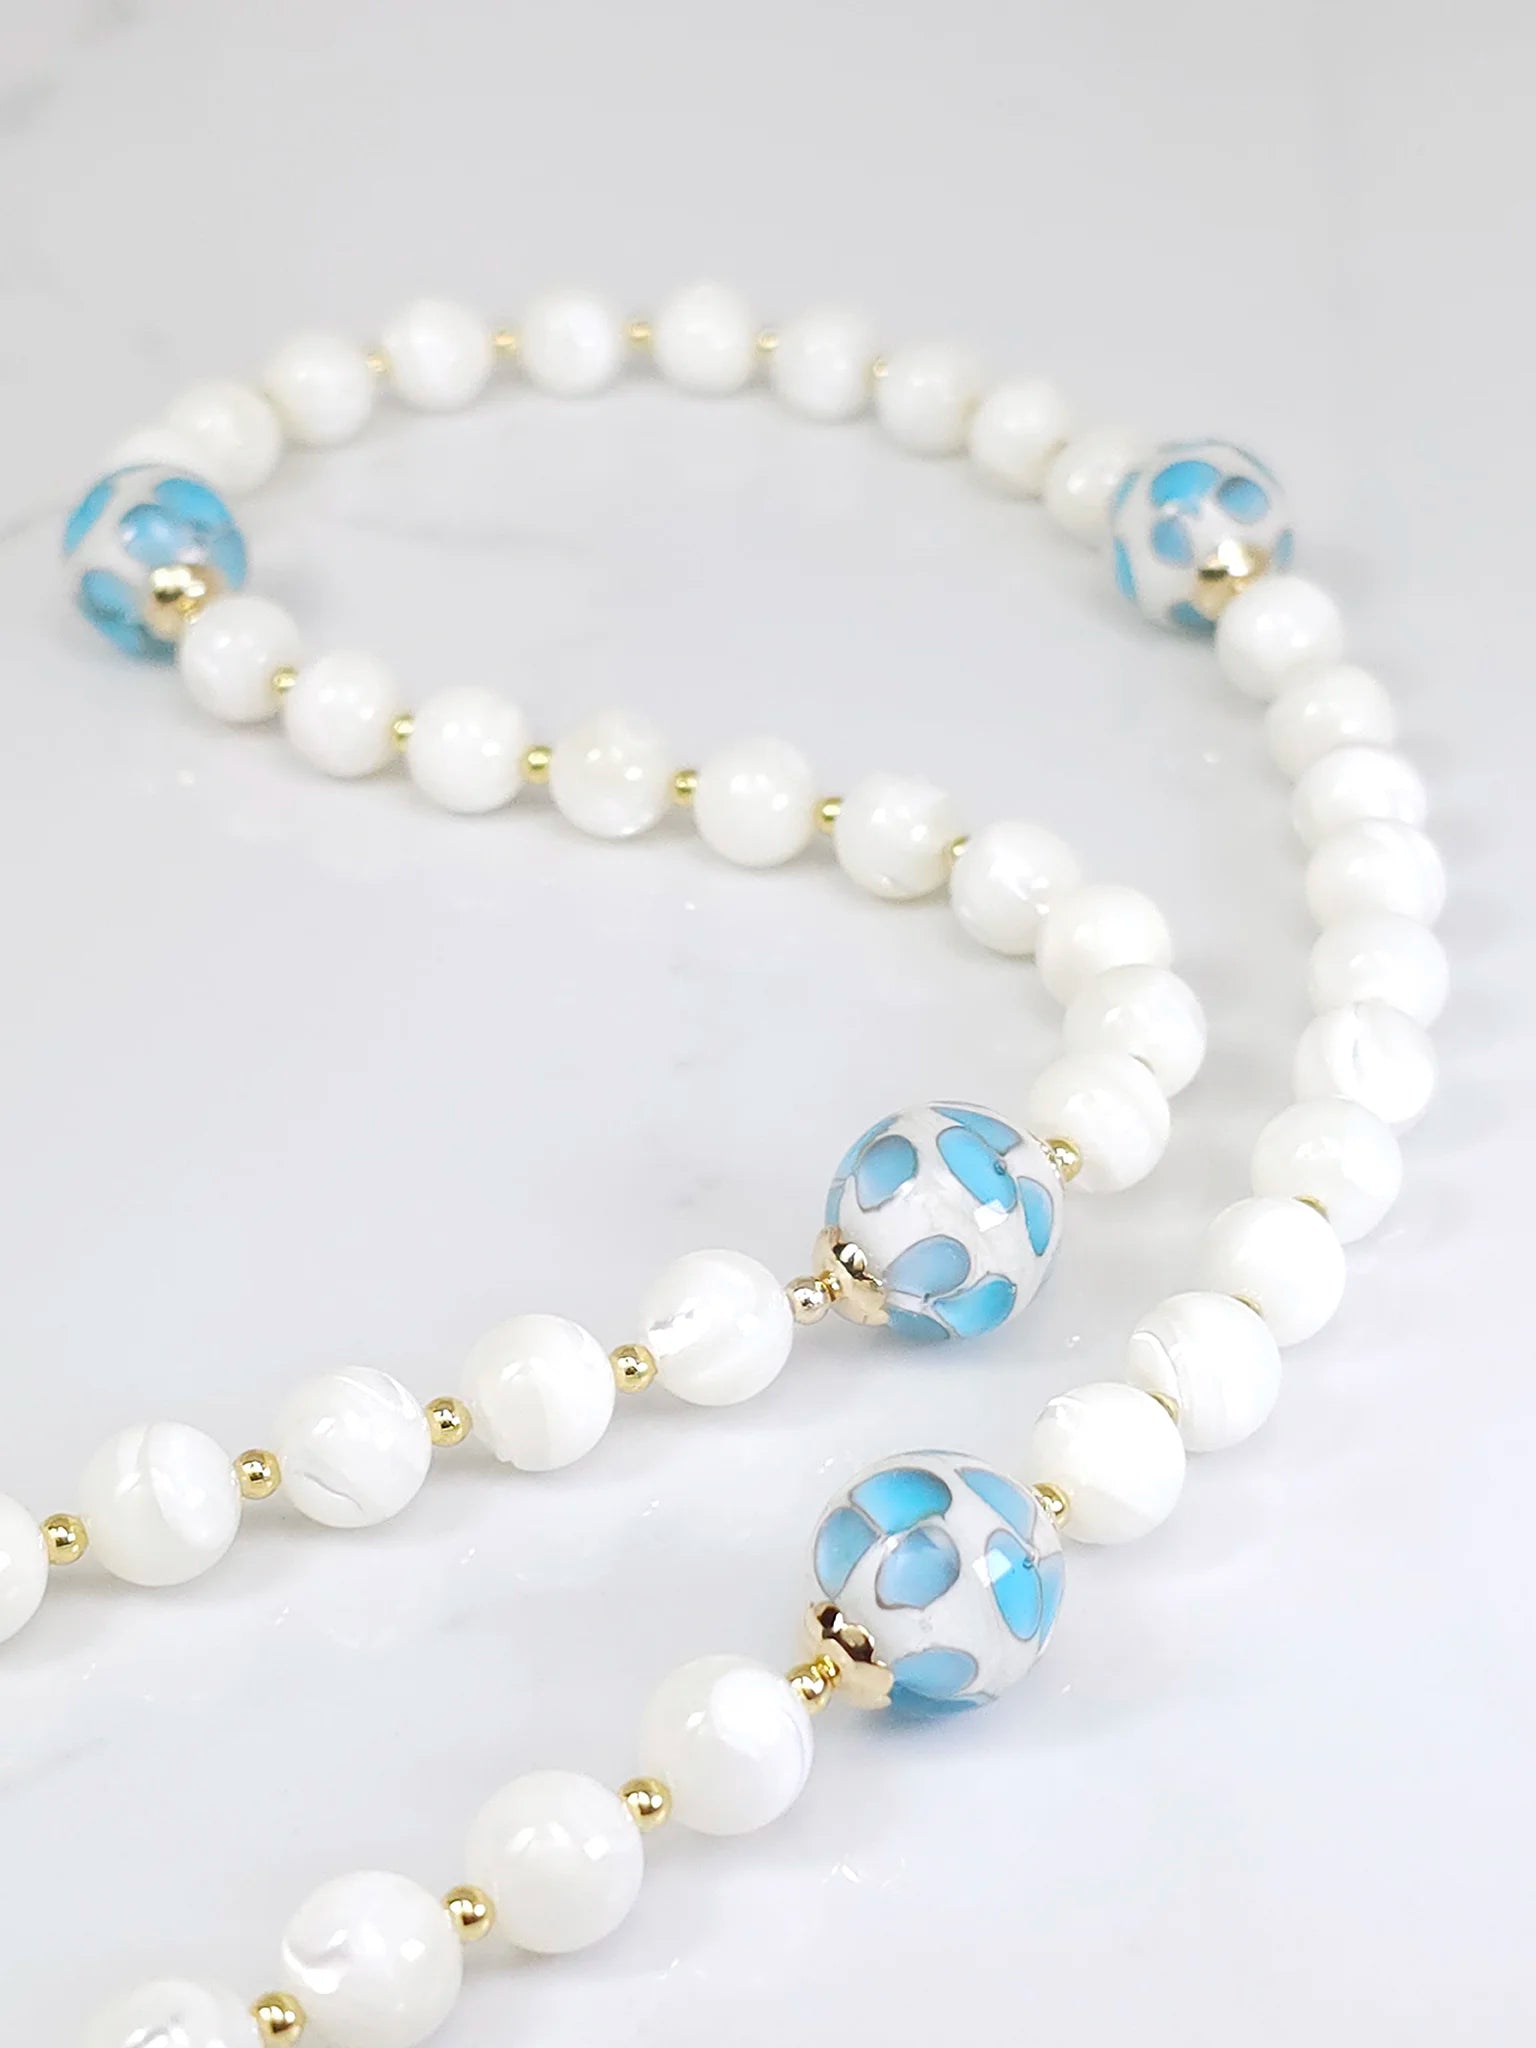 Authentic rosary beads made of White Mother of Pearl, gracefully laid out on a table.